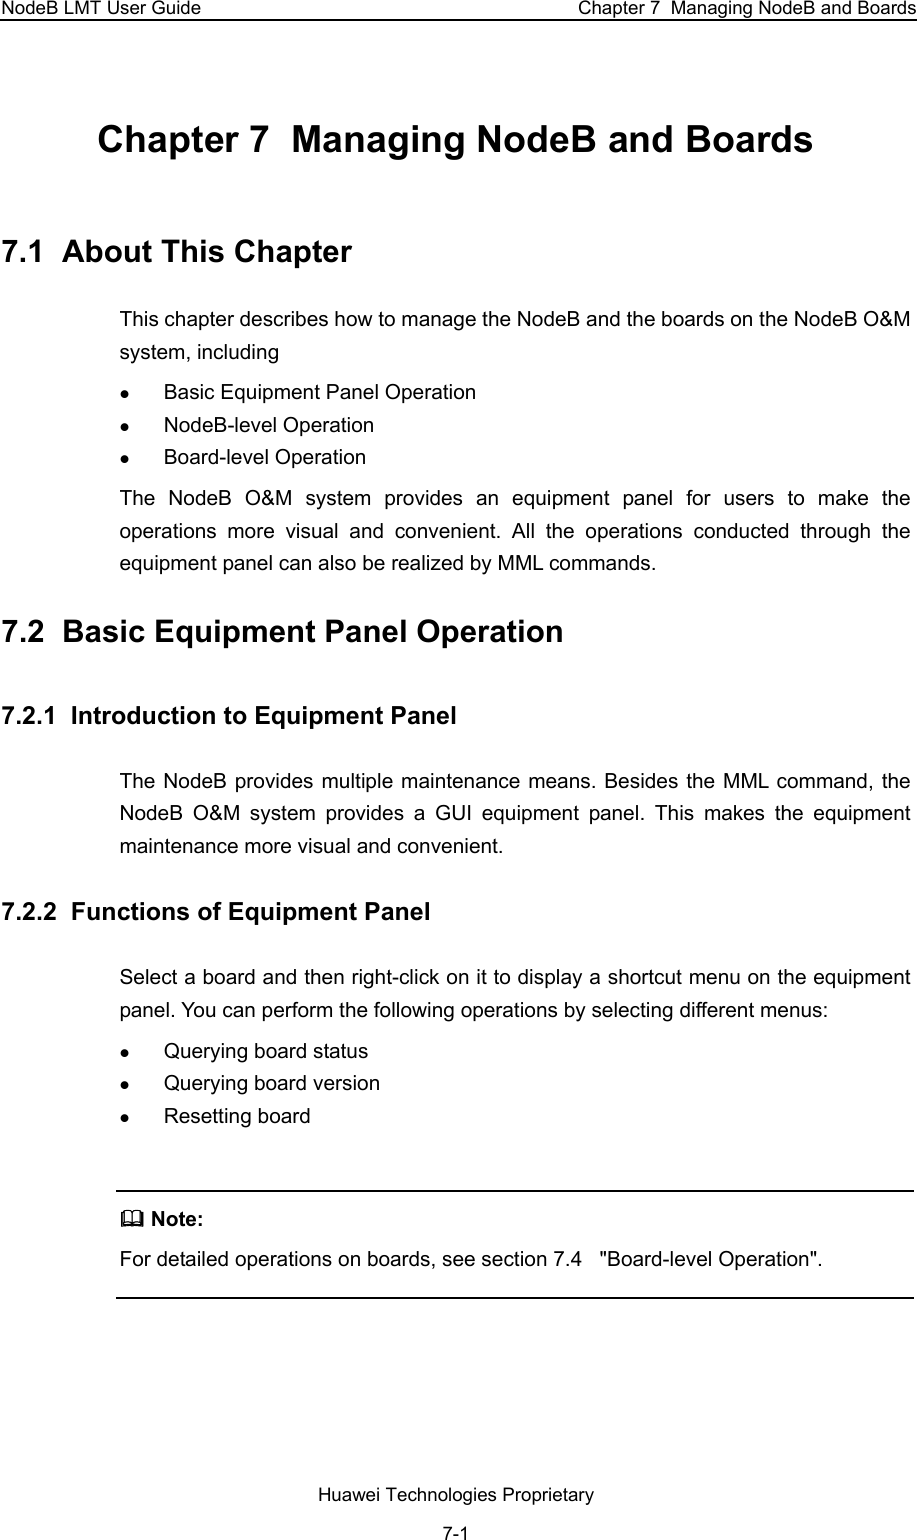 NodeB LMT User Guide  Chapter 7  Managing NodeB and Boards Chapter 7  Managing NodeB and Boards 7.1  About This Chapter This chapter describes how to manage the NodeB and the boards on the NodeB O&amp;M system, including z Basic Equipment Panel Operation z NodeB-level Operation z Board-level Operation The NodeB O&amp;M system provides an equipment panel for users to make the operations more visual and convenient. All the operations conducted through the equipment panel can also be realized by MML commands.  7.2  Basic Equipment Panel Operation 7.2.1  Introduction to Equipment Panel The NodeB provides multiple maintenance means. Besides the MML command, the NodeB O&amp;M system provides a GUI equipment panel. This makes the equipment maintenance more visual and convenient.  7.2.2  Functions of Equipment Panel  Select a board and then right-click on it to display a shortcut menu on the equipment panel. You can perform the following operations by selecting different menus: z Querying board status z Querying board version  z Resetting board    Note:  For detailed operations on boards, see section 7.4   &quot;Board-level Operation&quot;.   Huawei Technologies Proprietary 7-1 